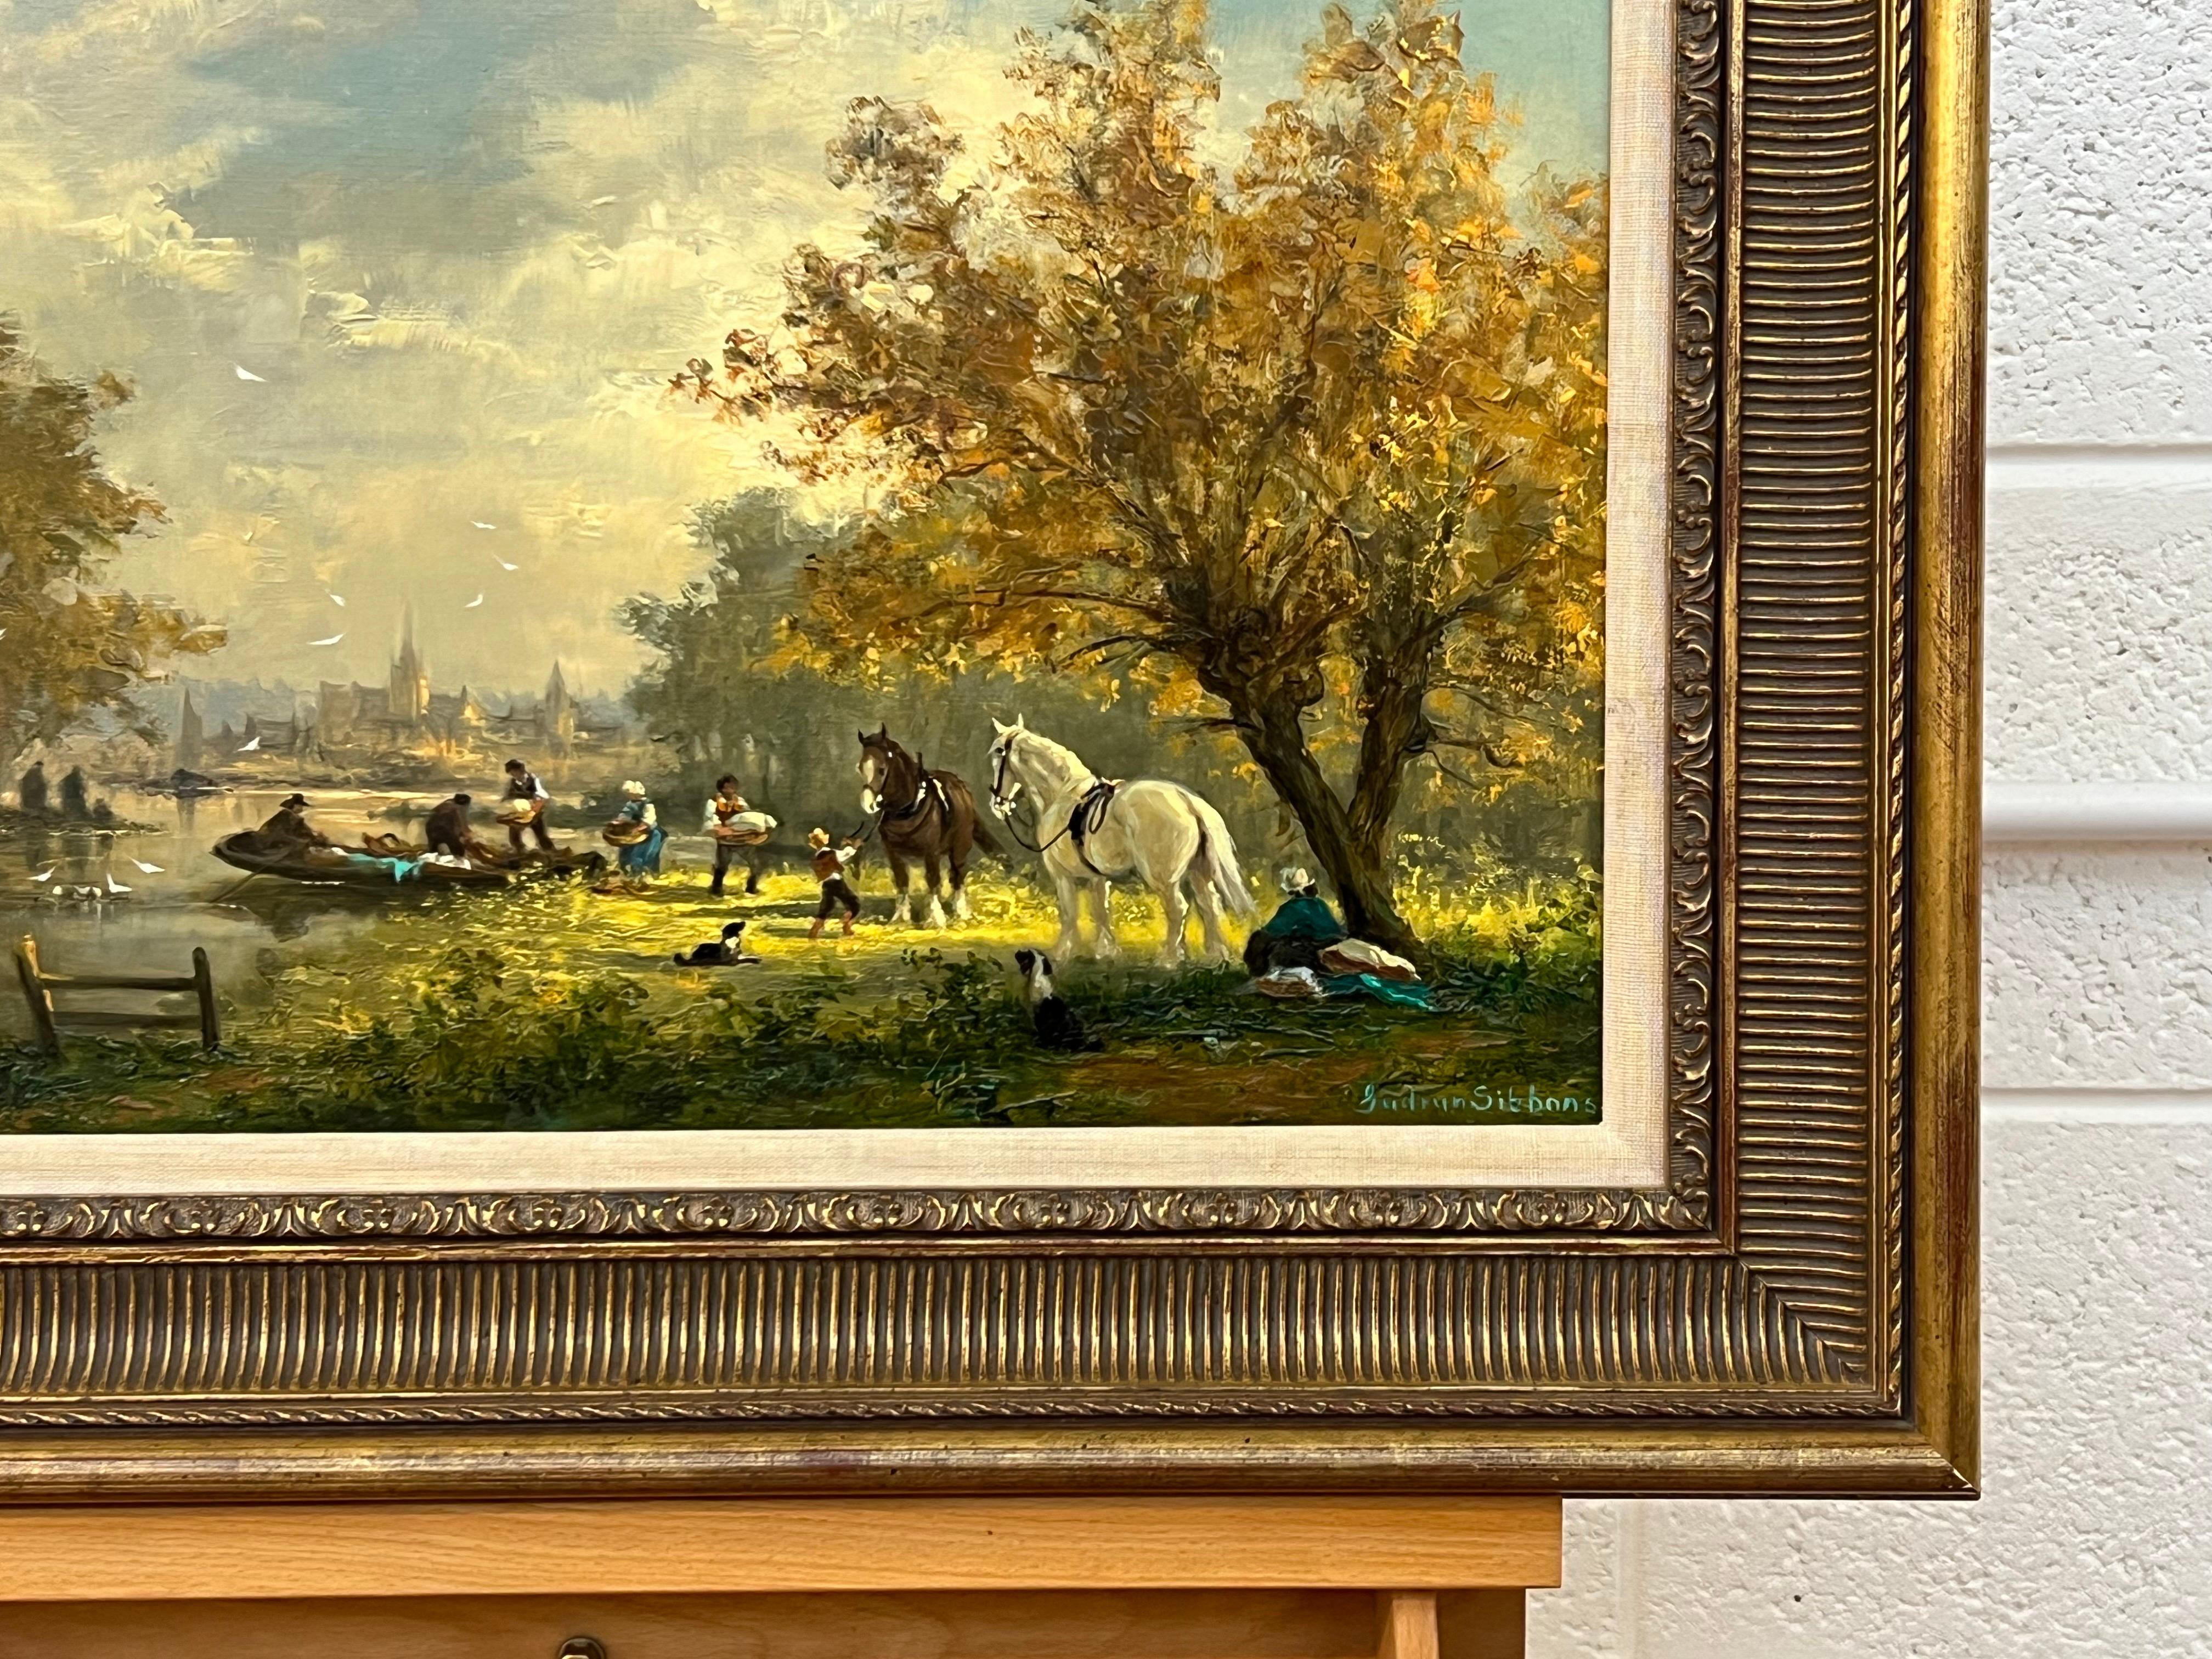 Idyllic Countryside Scene with River Boat, Horses, Figures & Dogs in Sunshine For Sale 2